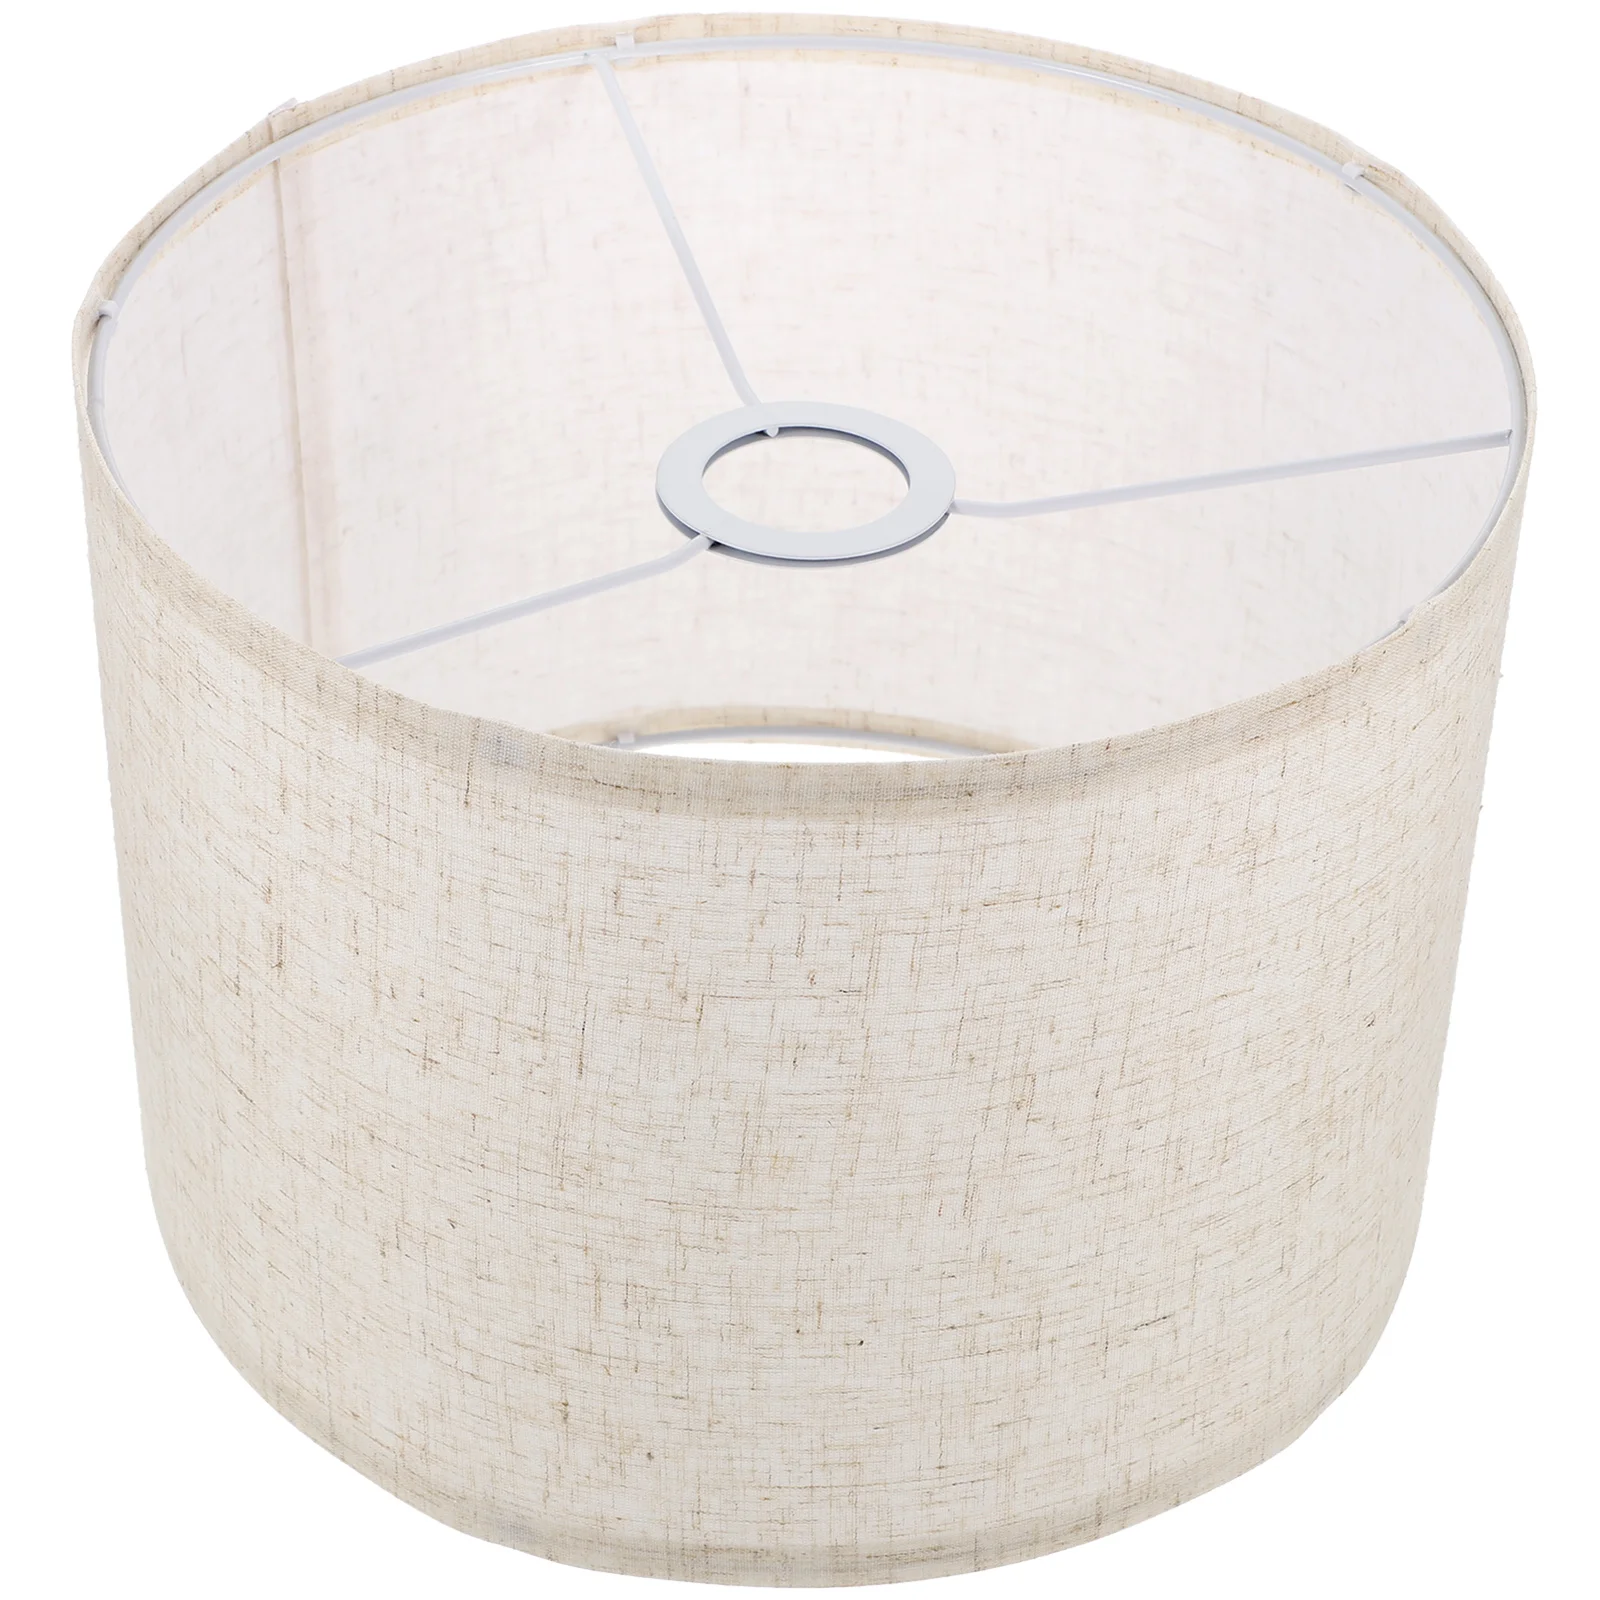 

Shade Lamp Light Lampshade Cover Linen Floor Drum Table Chandelier Desktop Cloth Wall Fabricclip Standing Replacement Bedside